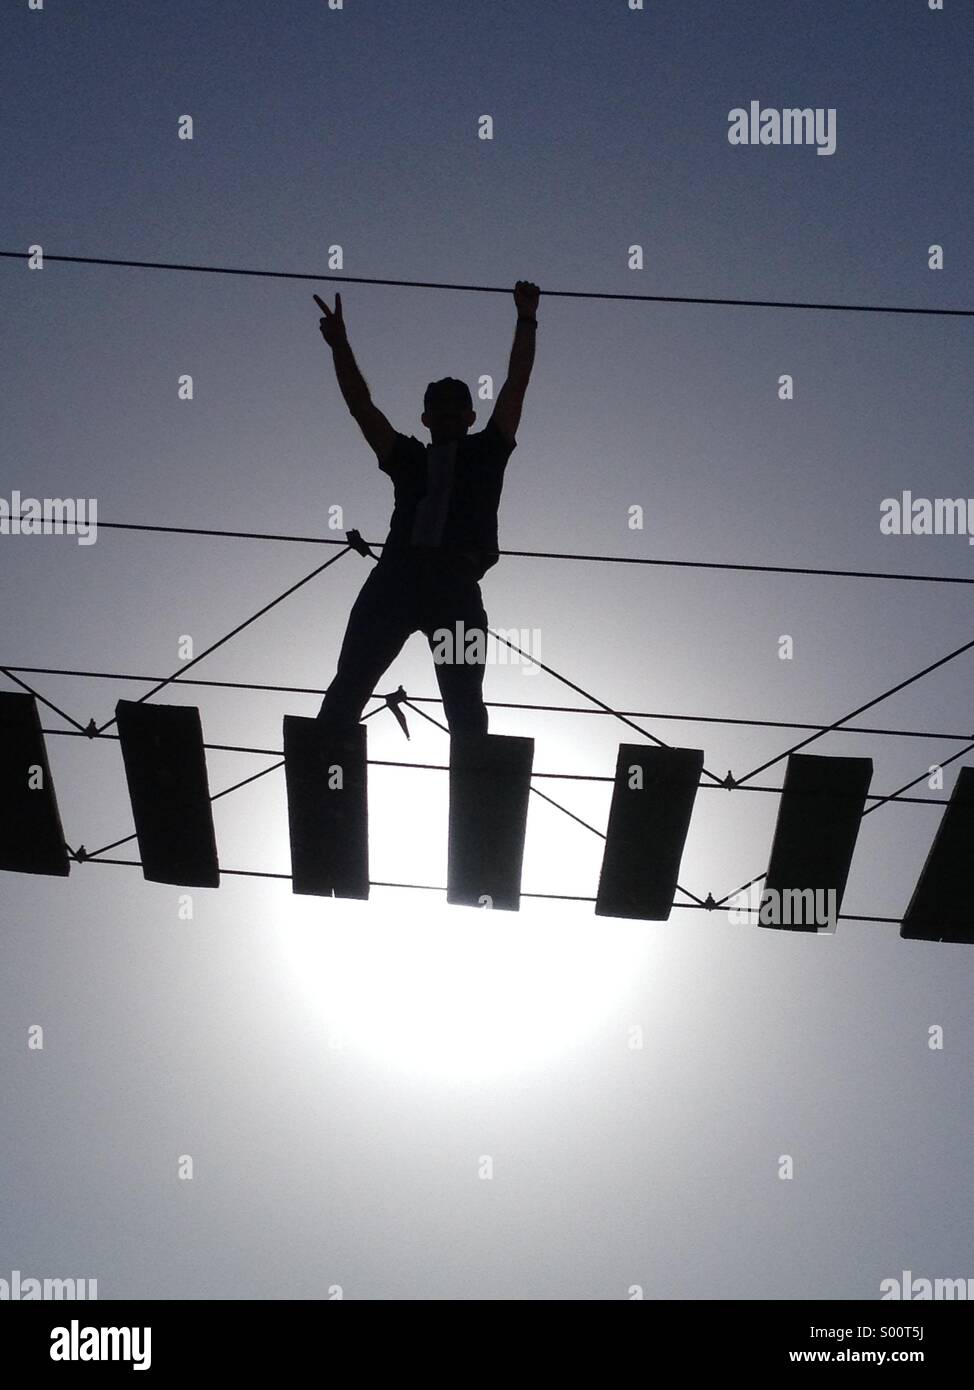 Winner standing on a hanging ladder with a winning sign Stock Photo